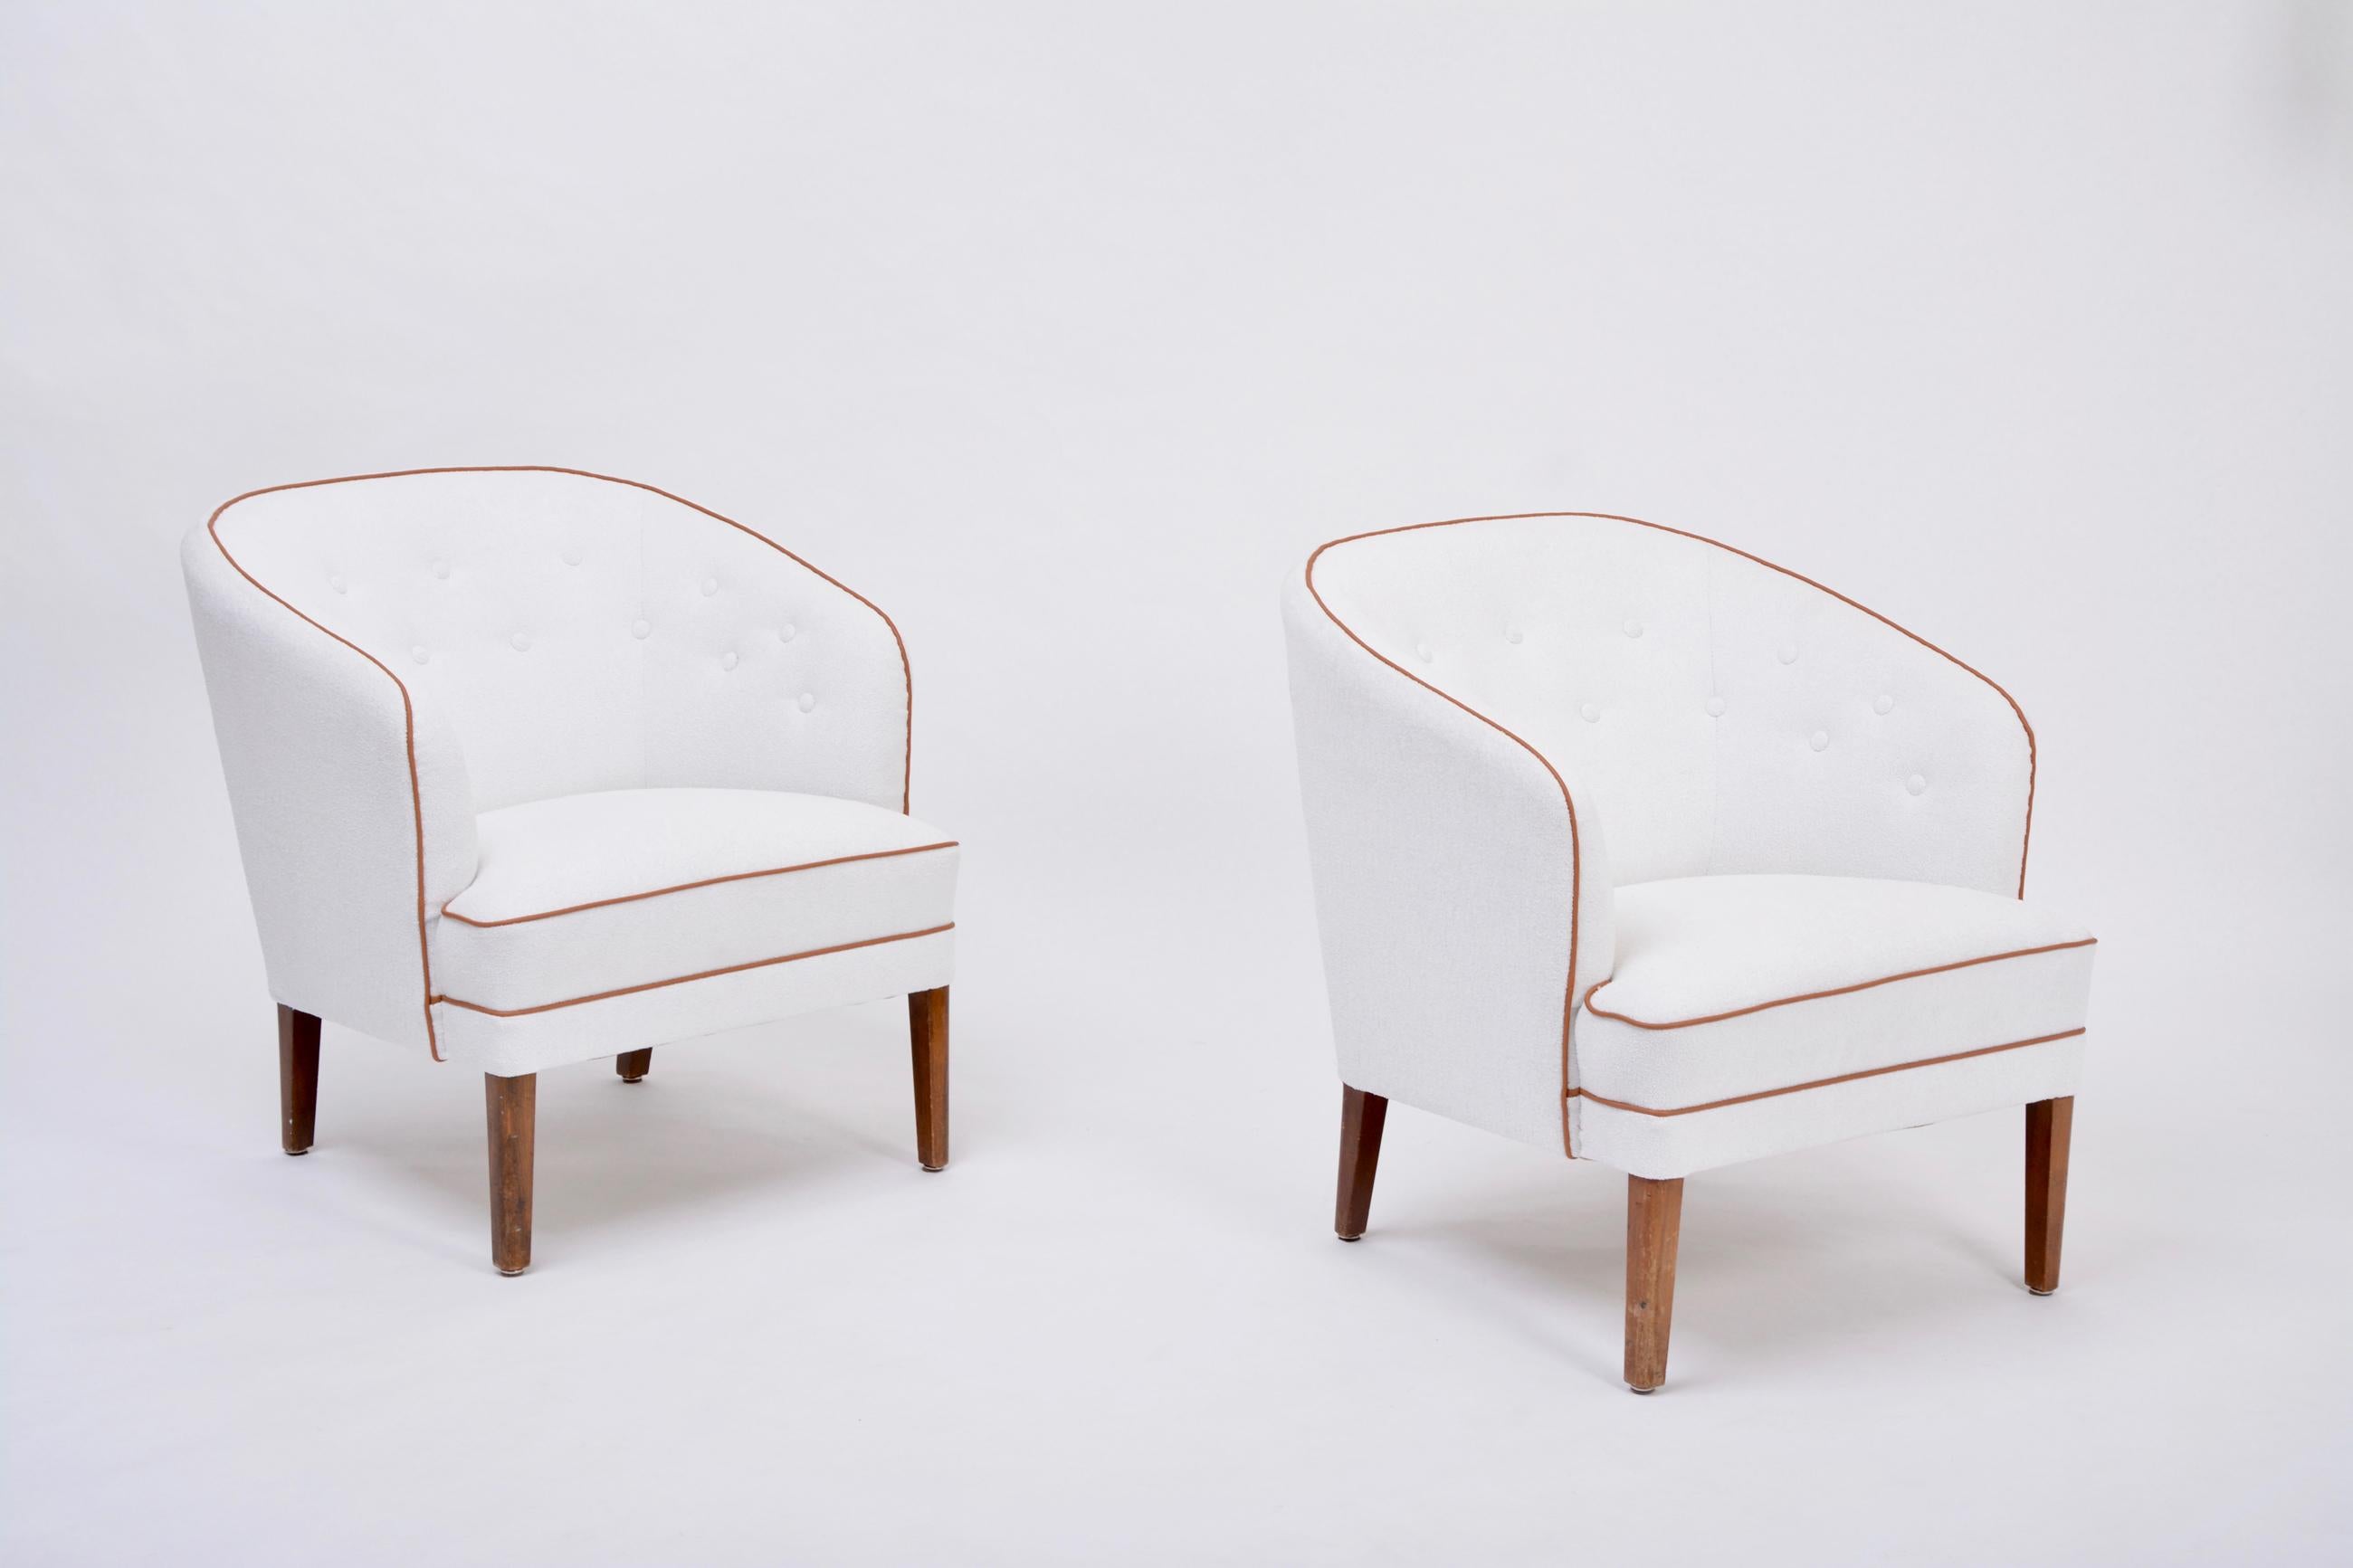 Pair of White Reupholstered Danish Mid-Century Armchairs by Ludvig Pontoppidan For Sale 2